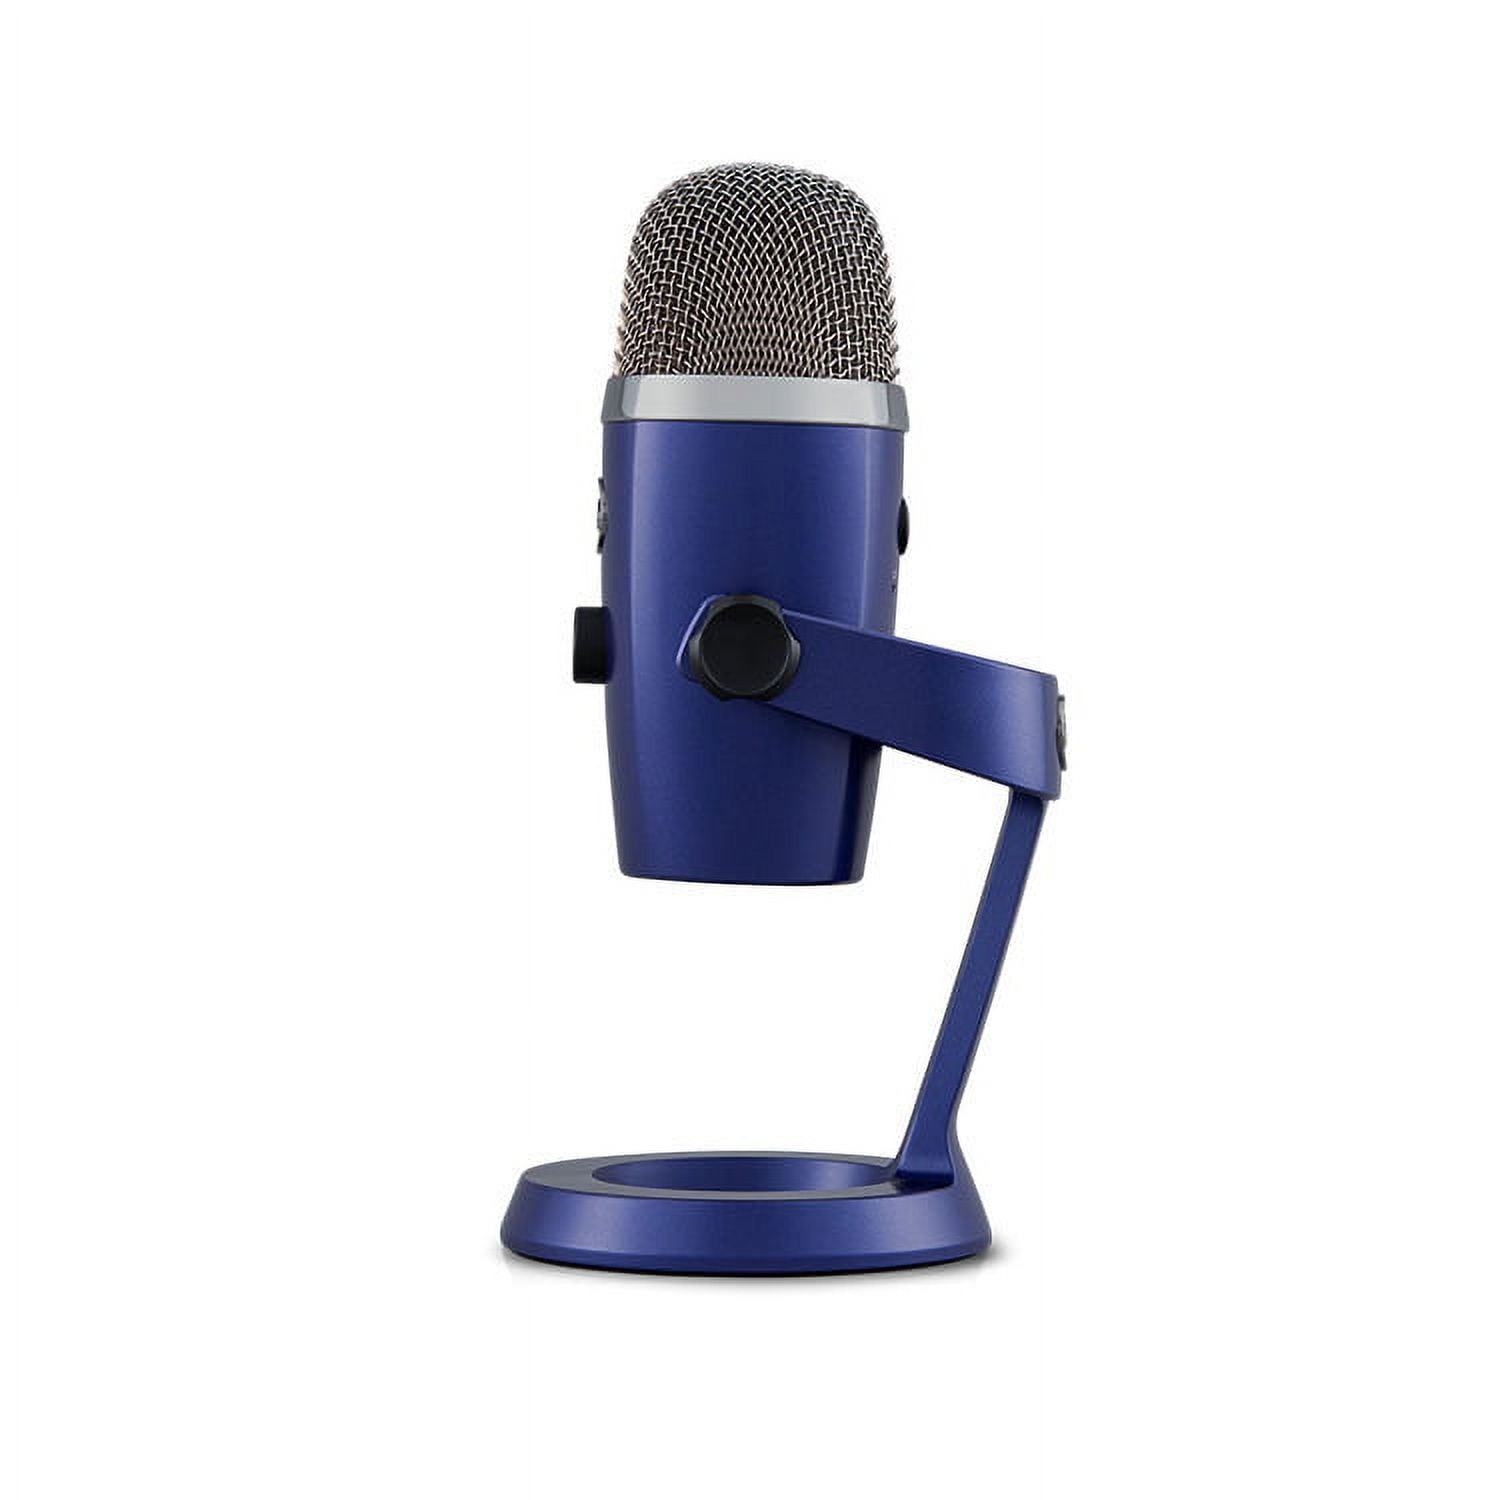 Blue shrinks down its most popular mic for the $99 Yeti Nano